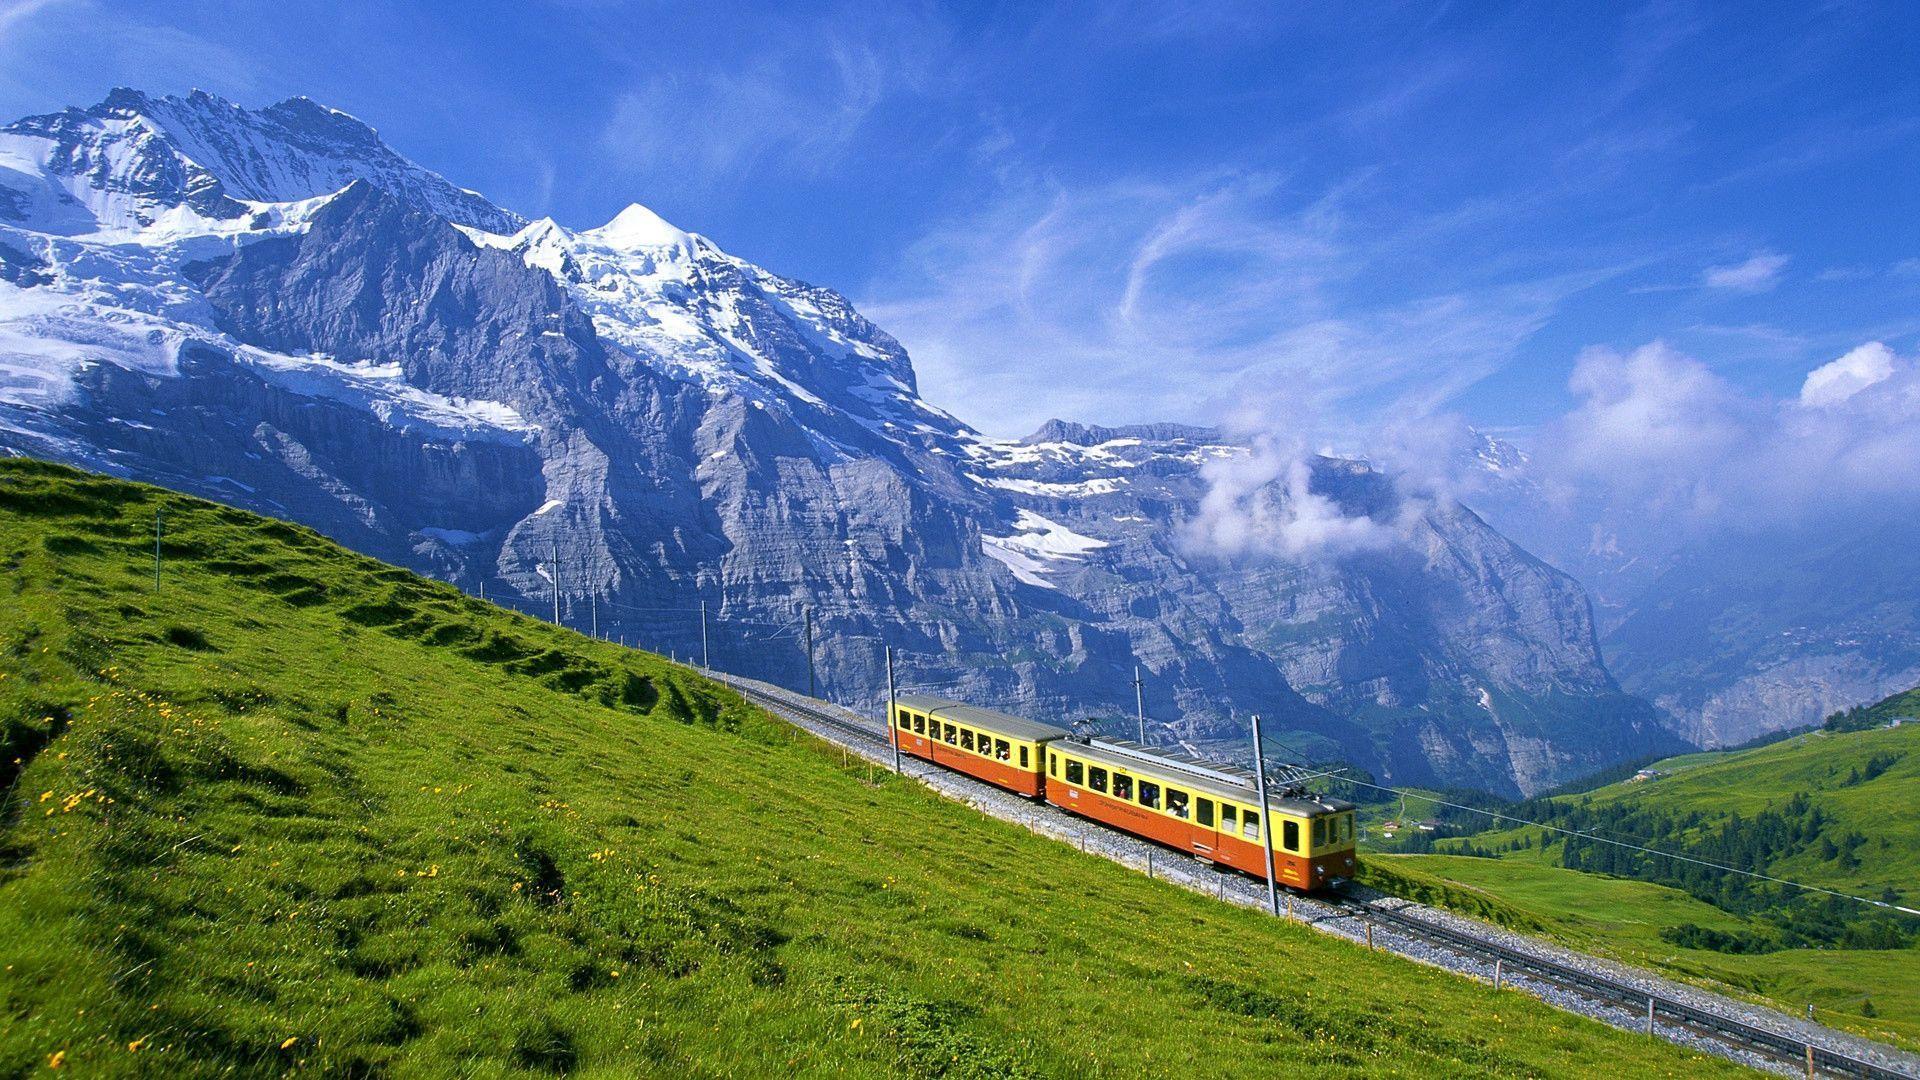 Train The Alps Wallpaper 1920x1080 px Free Download